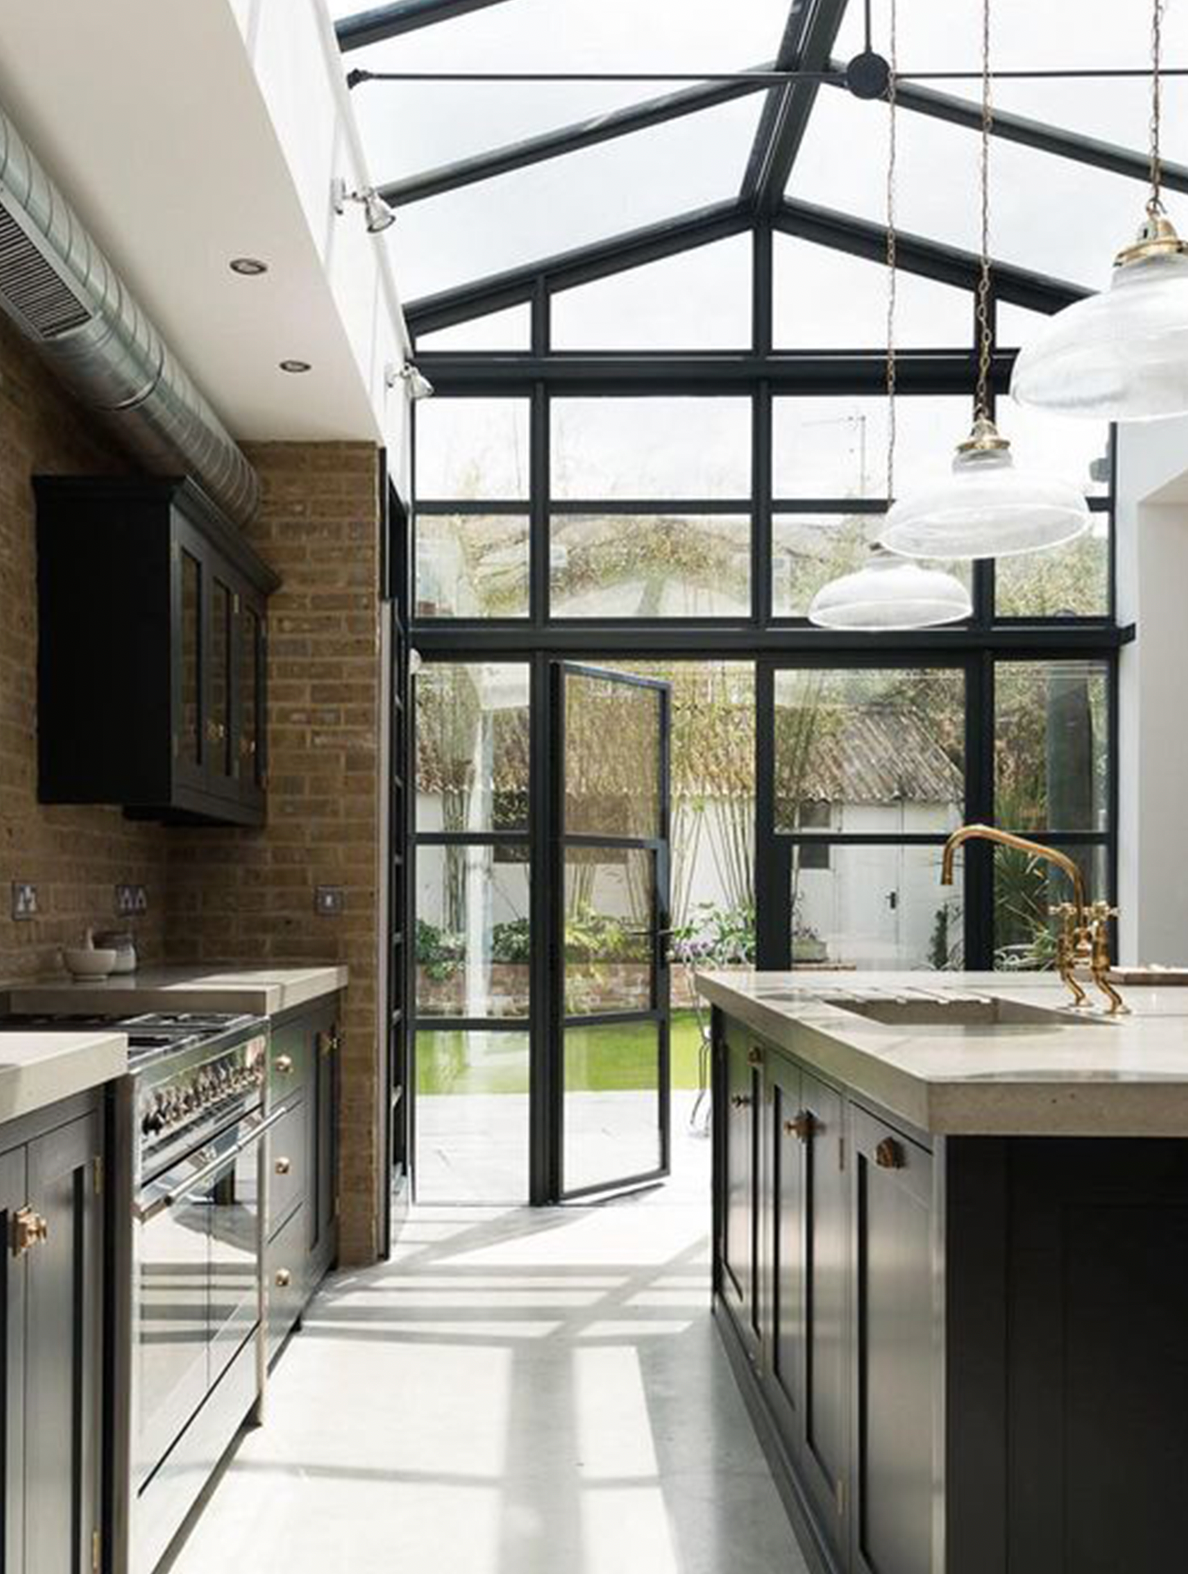 Beautiful kitchen with black framed windows and skylight.